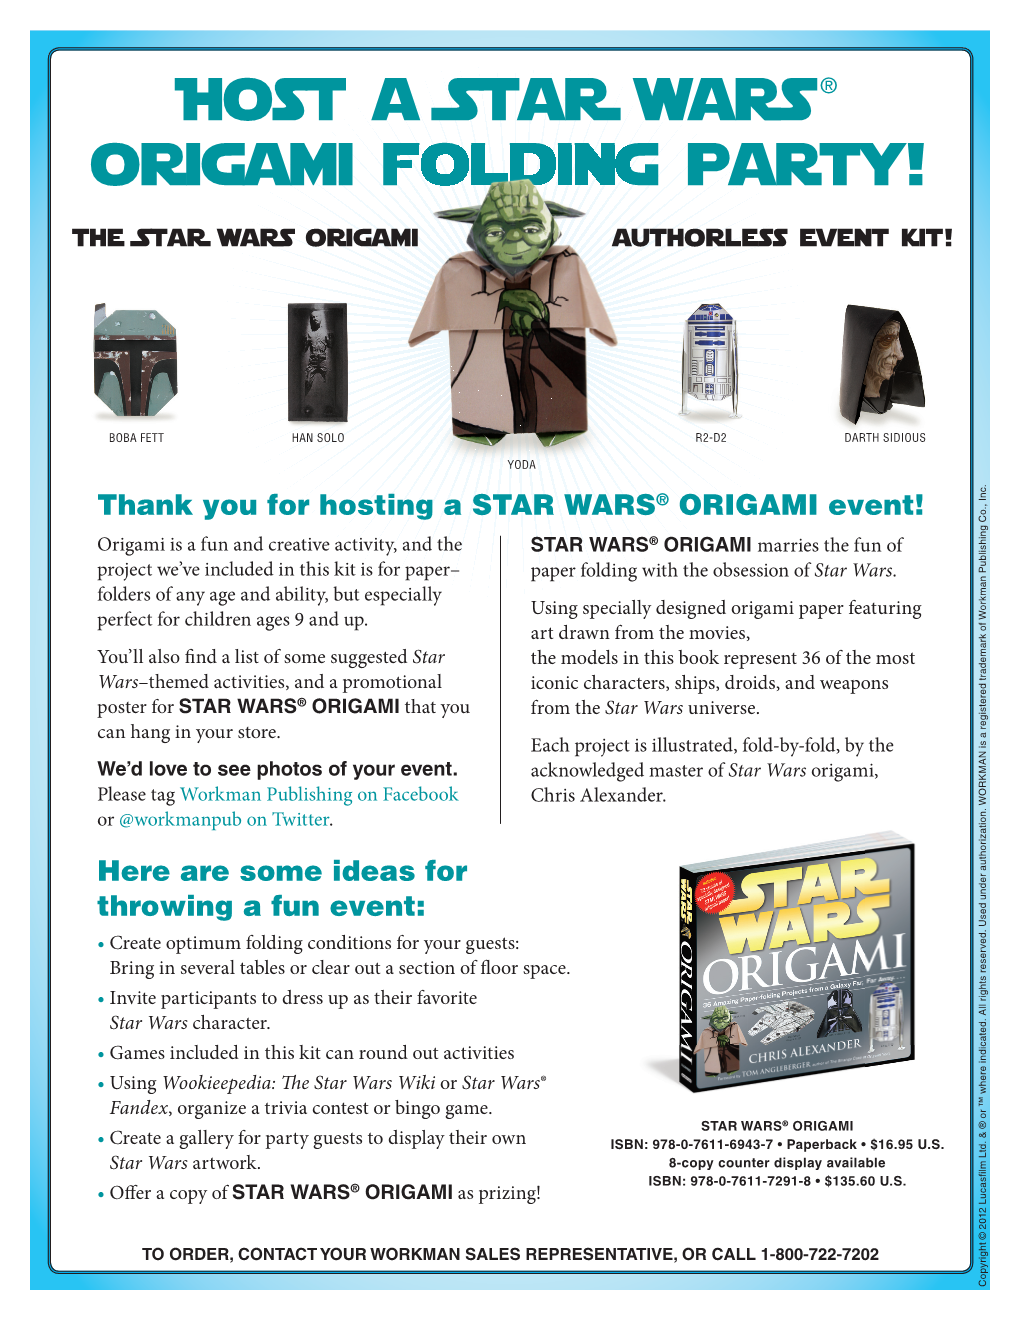 Host a Star Wars® Origami Folding Party!